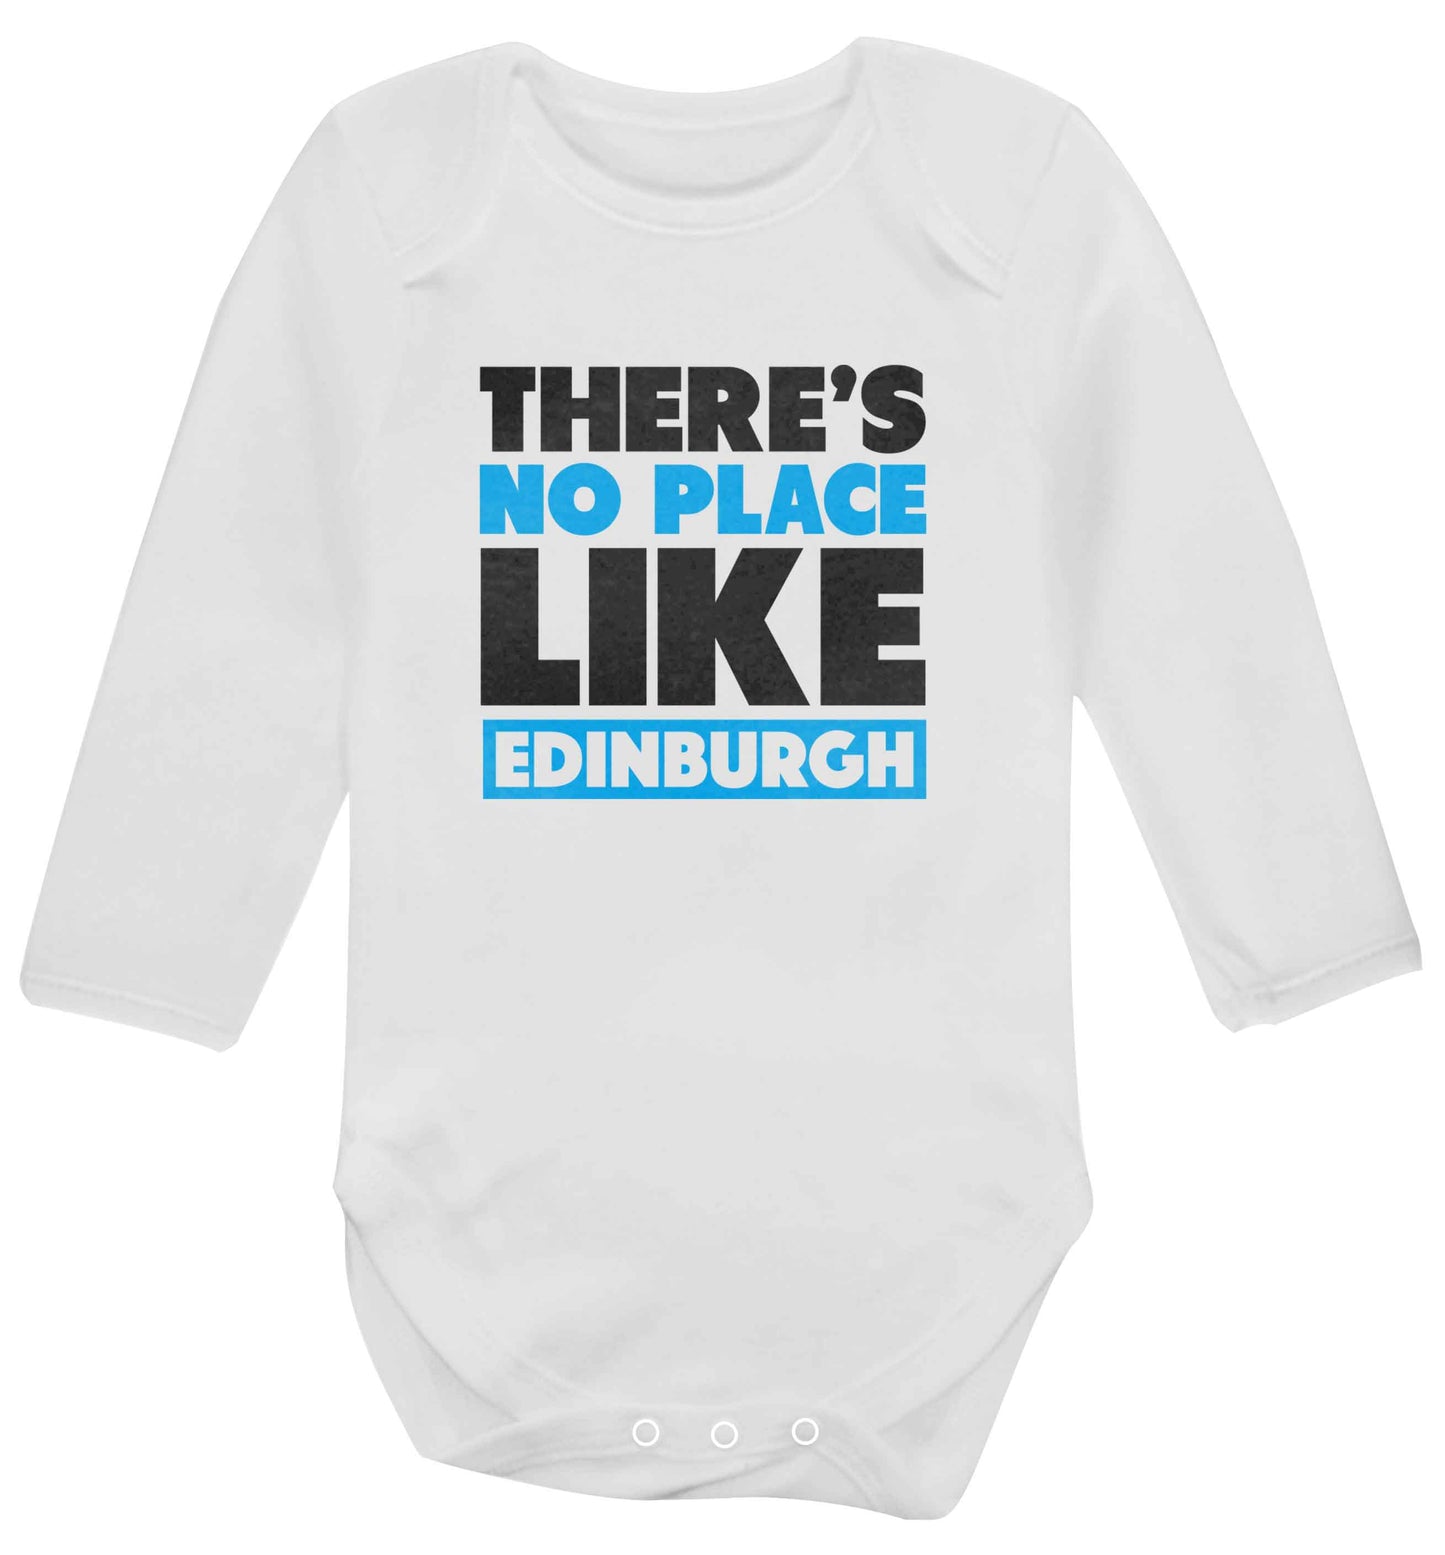 There's no place like Edinburgh baby vest long sleeved white 6-12 months